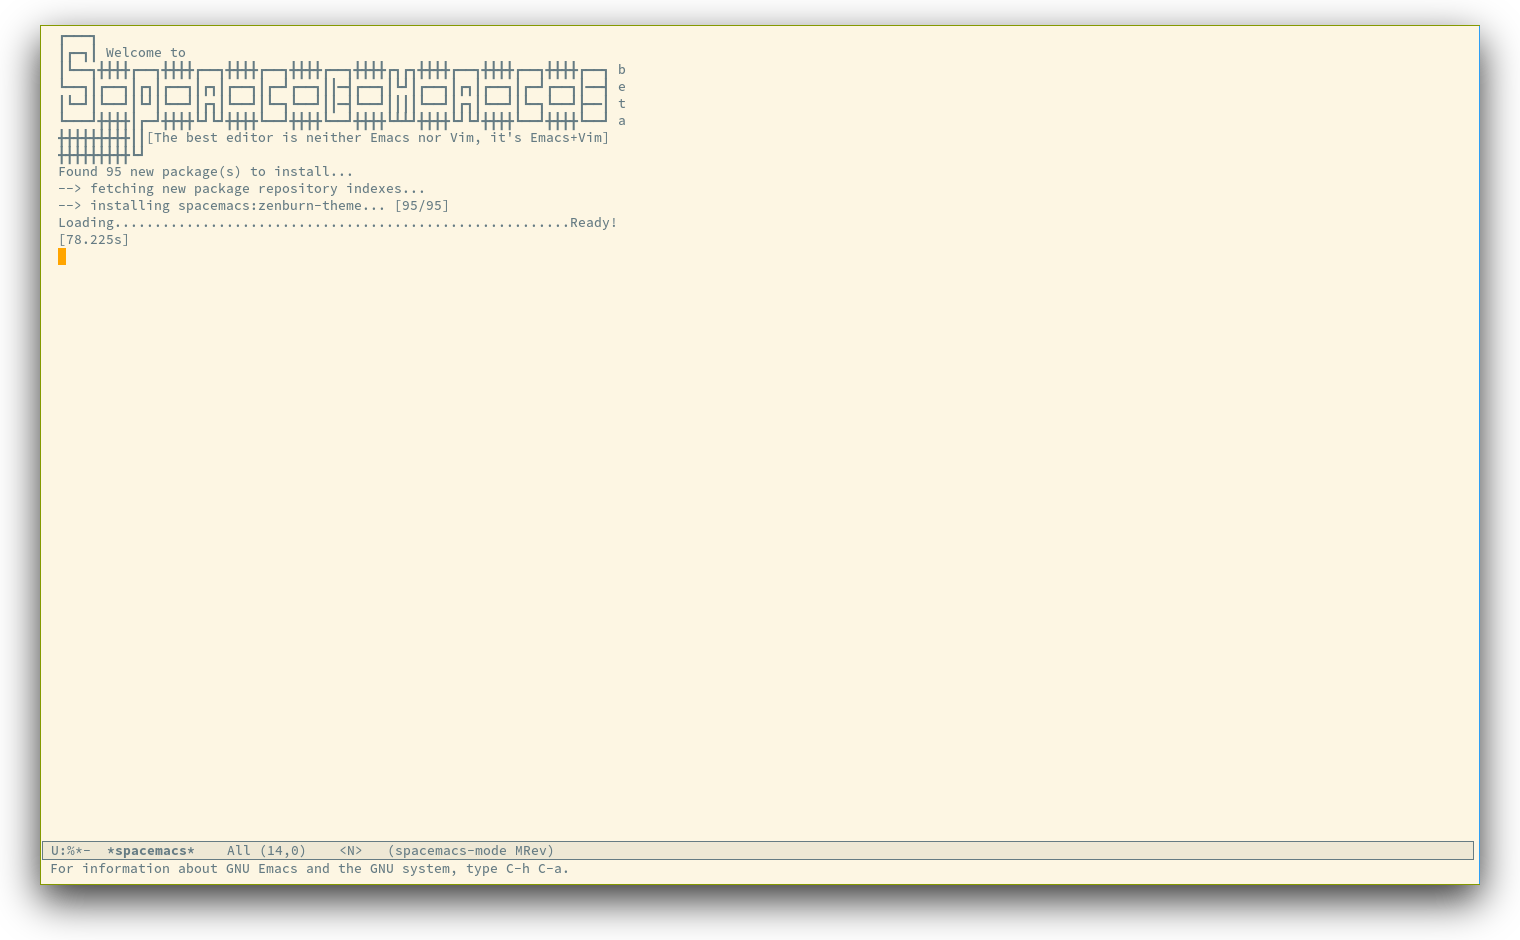 /TakeV/spacemacs/media/commit/80a9add5af67047dbae72be1e54f605908203cca/doc/img/spacemacs-startup.png